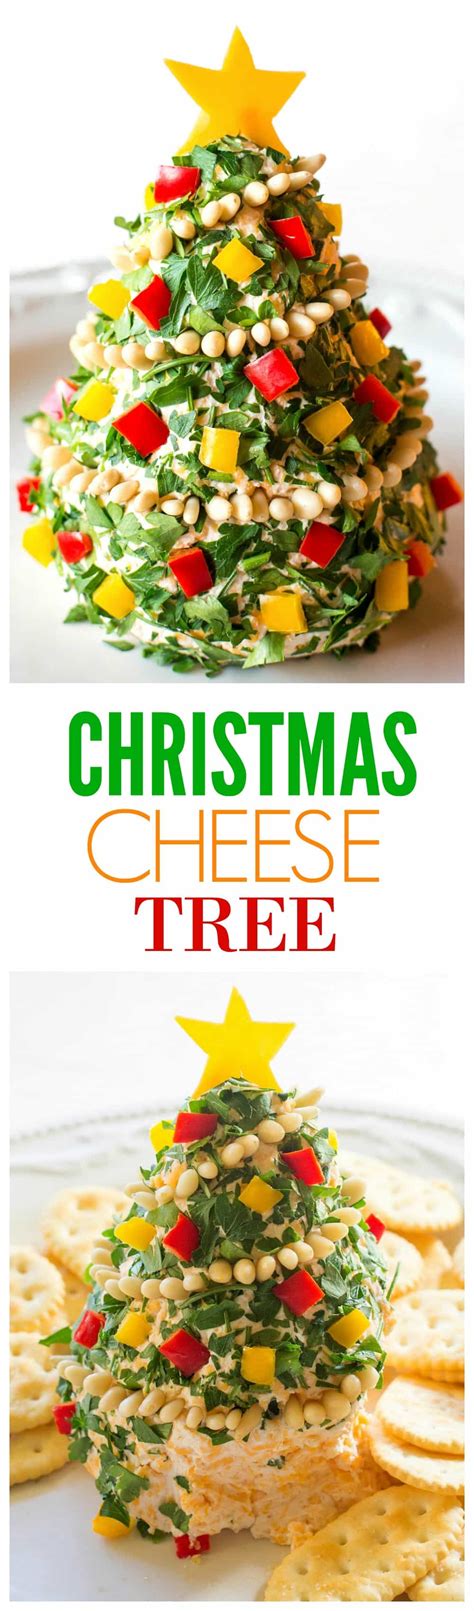 We've dug deep into our treasure filled with sweet and christmas tree puff pastry #christmas #appetizer. Christmas Cheese Tree - The Girl Who Ate Everything